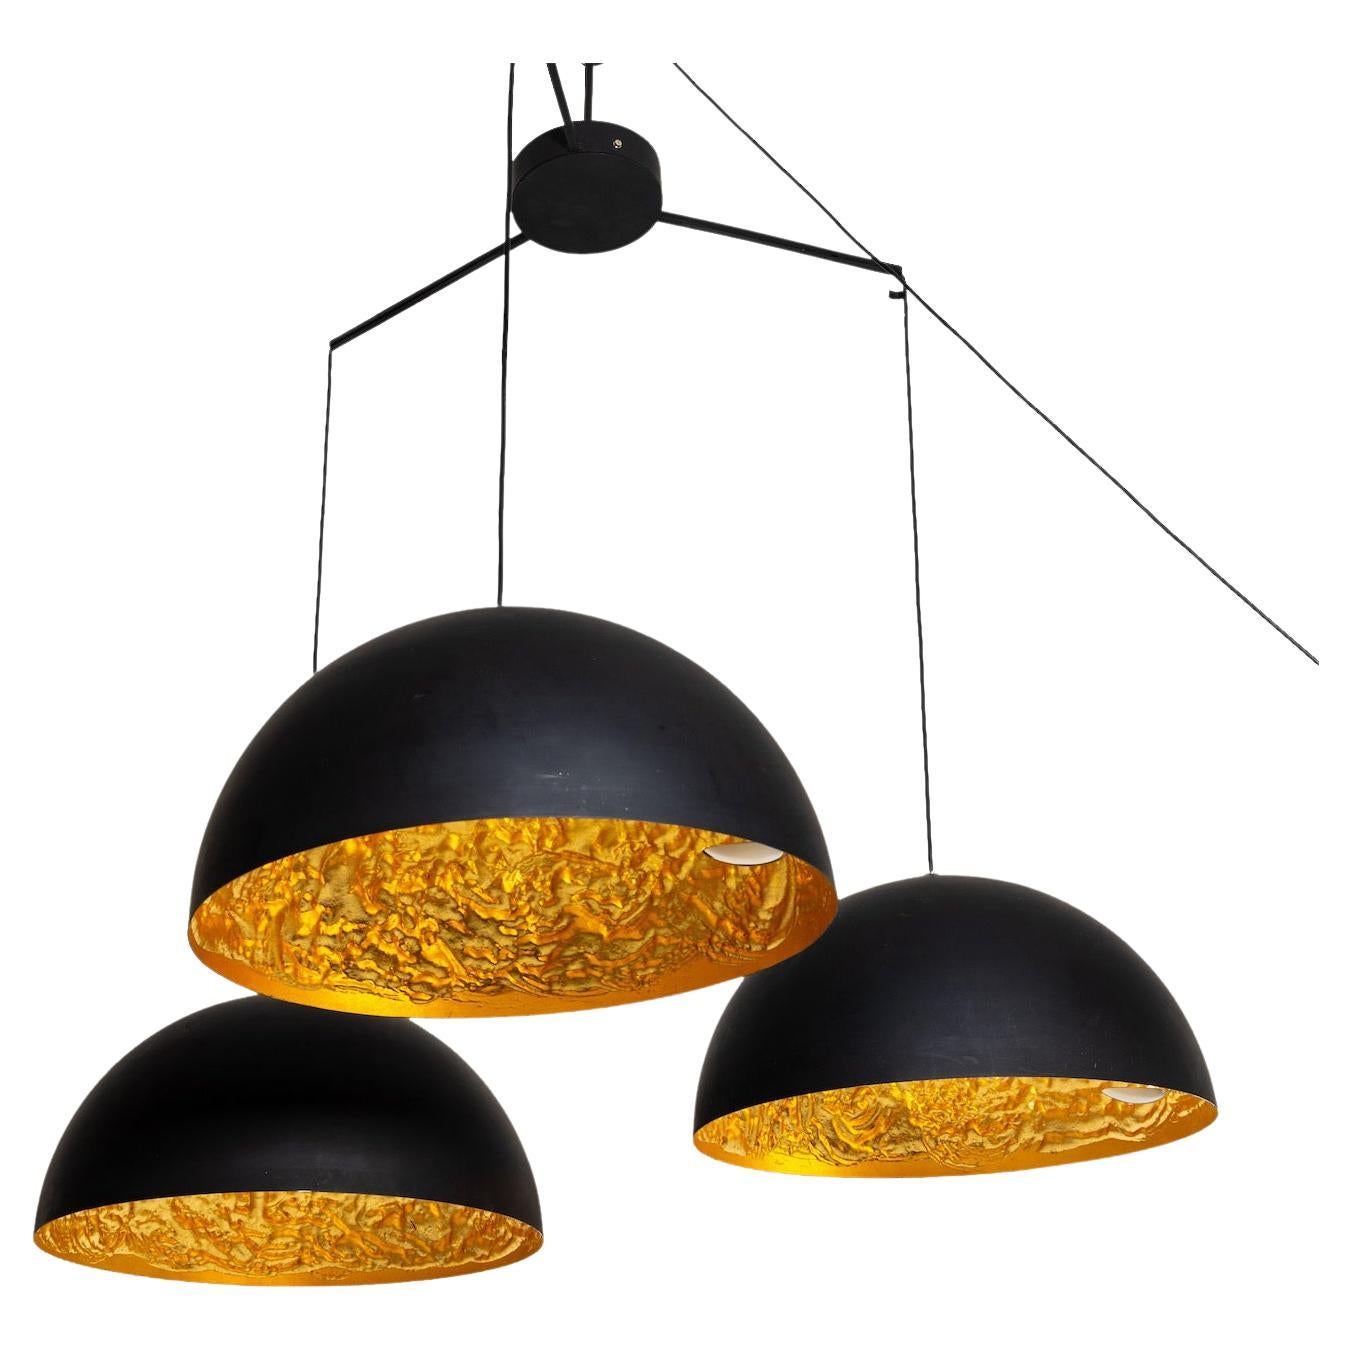 20th Century Black-Gold Italian Vintage Metal Ceiling Light by Catellani & Smith For Sale